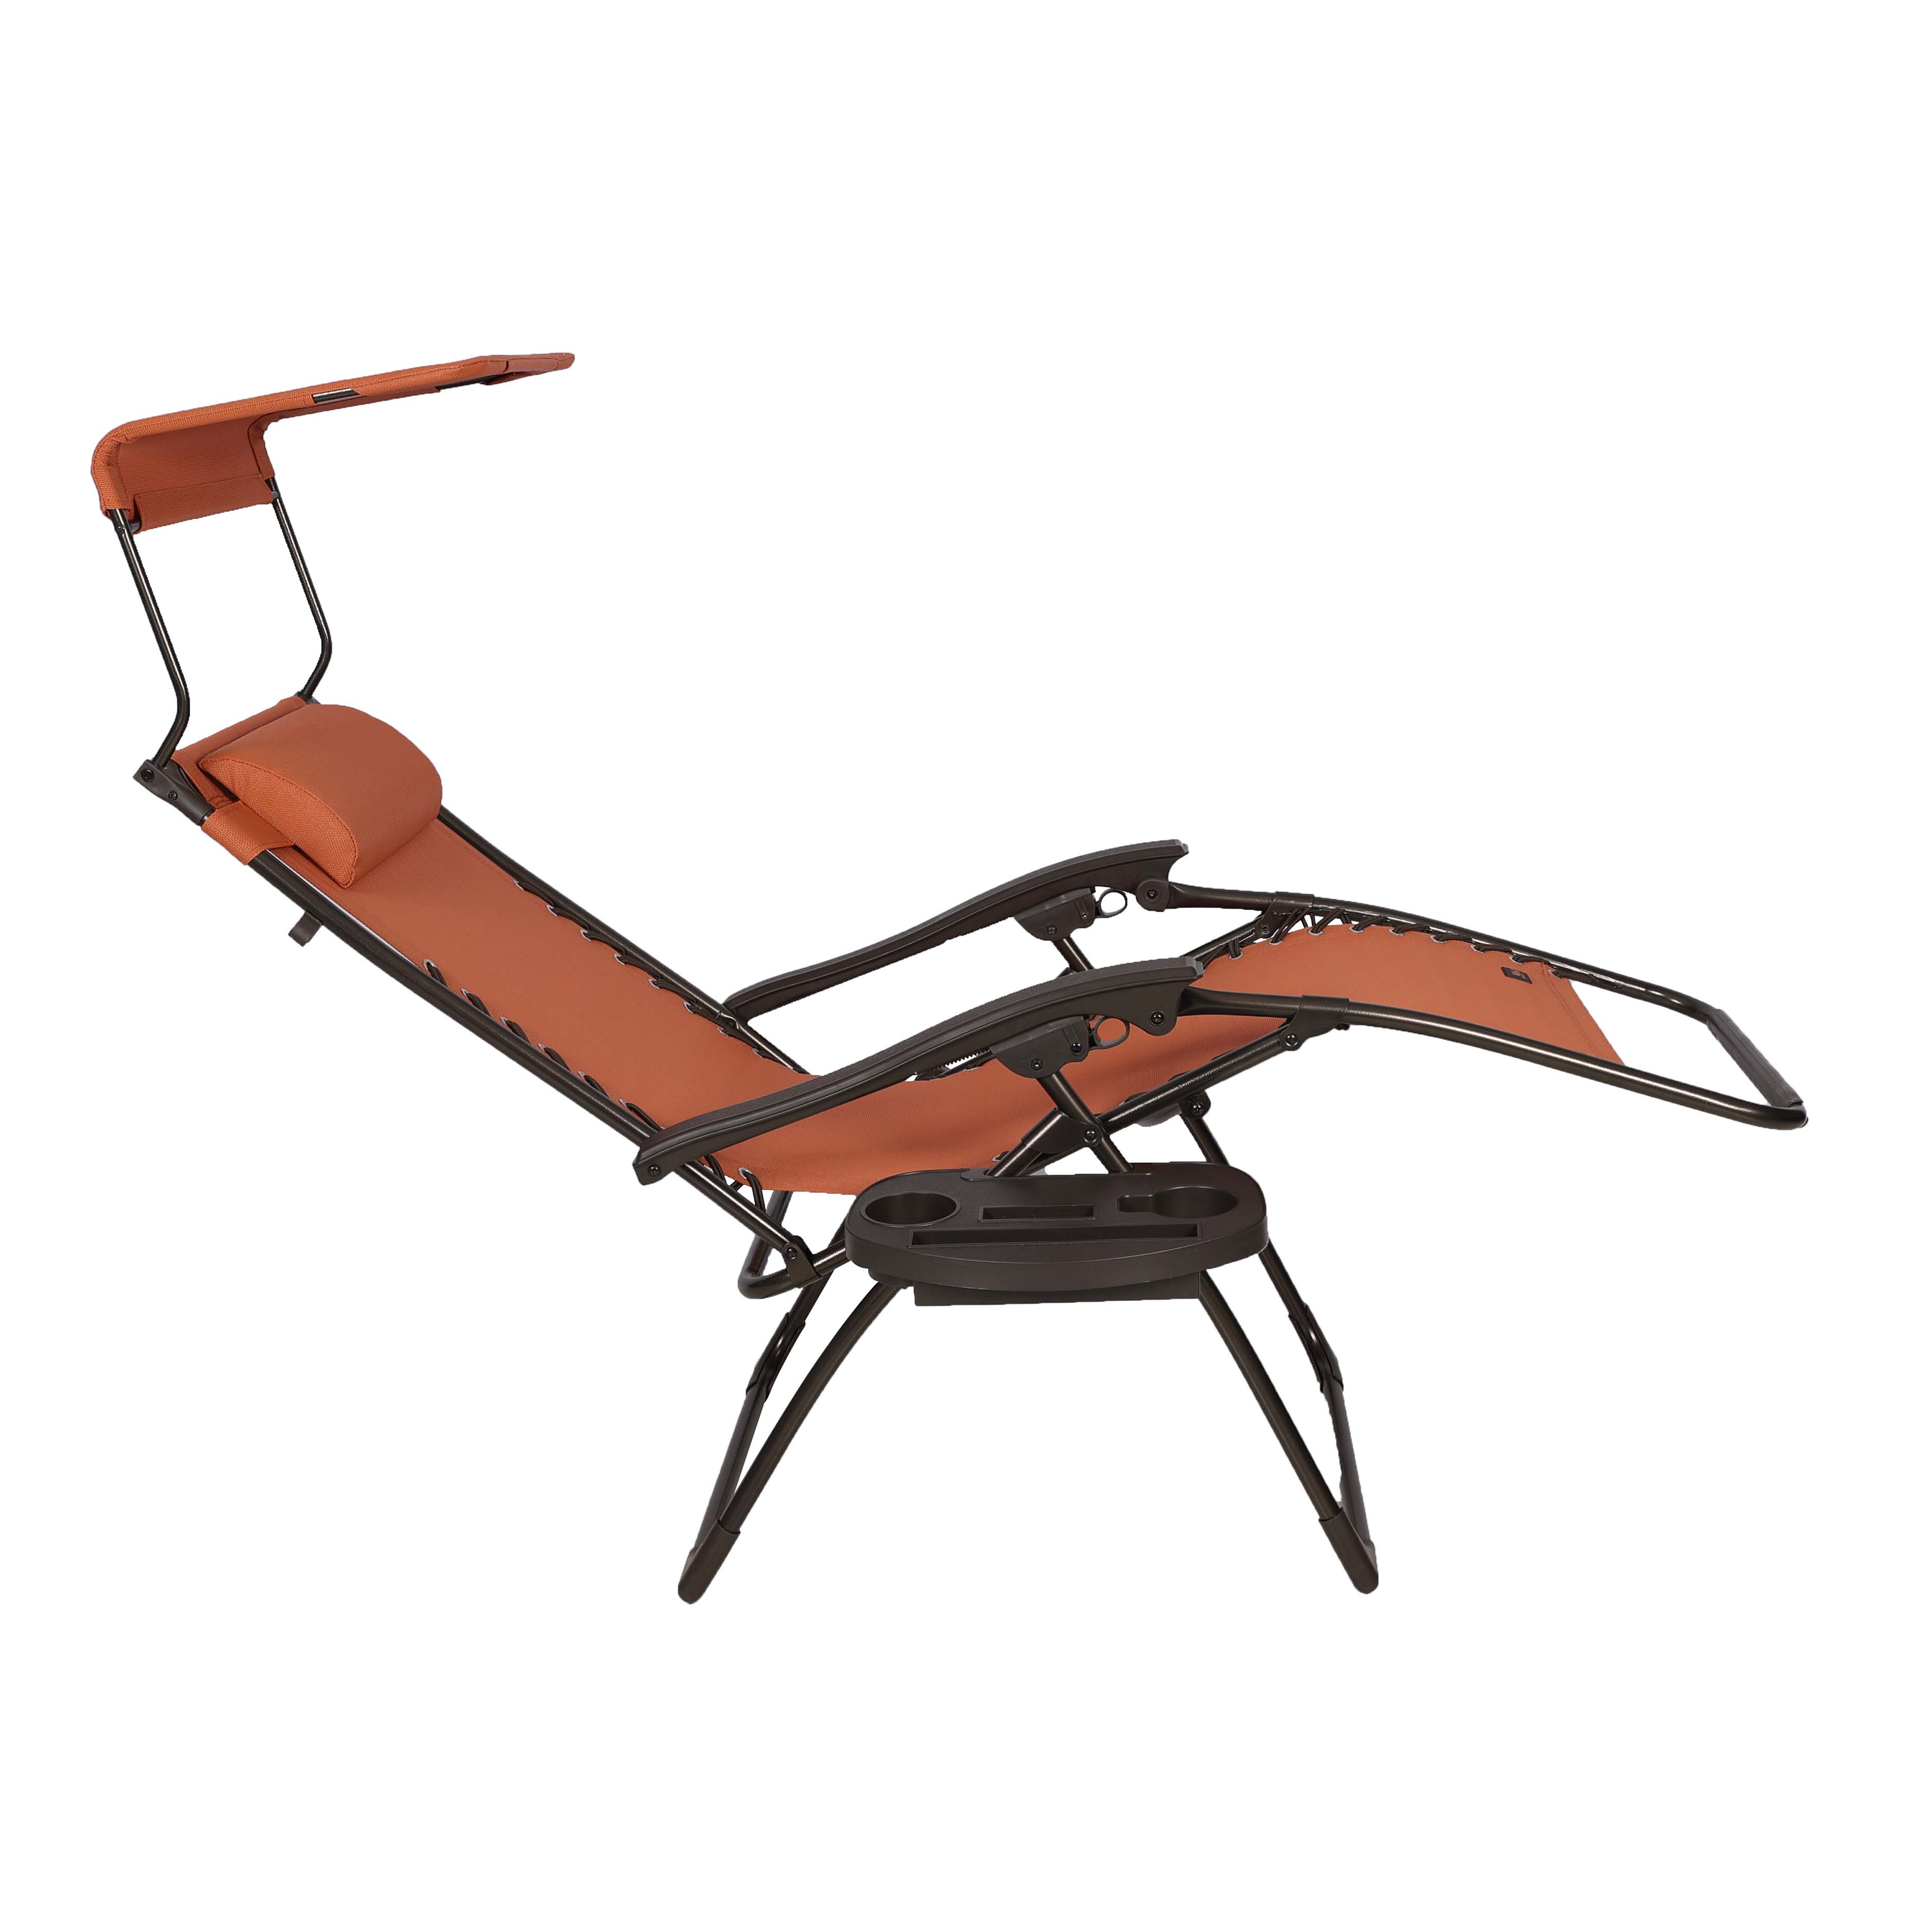 Bliss Hammocks 26" Wide Zero Gravity Chair w/ Canopy, Pillow, & Drink Tray , Outdoor, Lawn, Deck, Patio , Foladable, Adjustable Lounge Chair, Weather & Rust Resistant , 300 Lbs Capacity-Terracotta - image 5 of 6